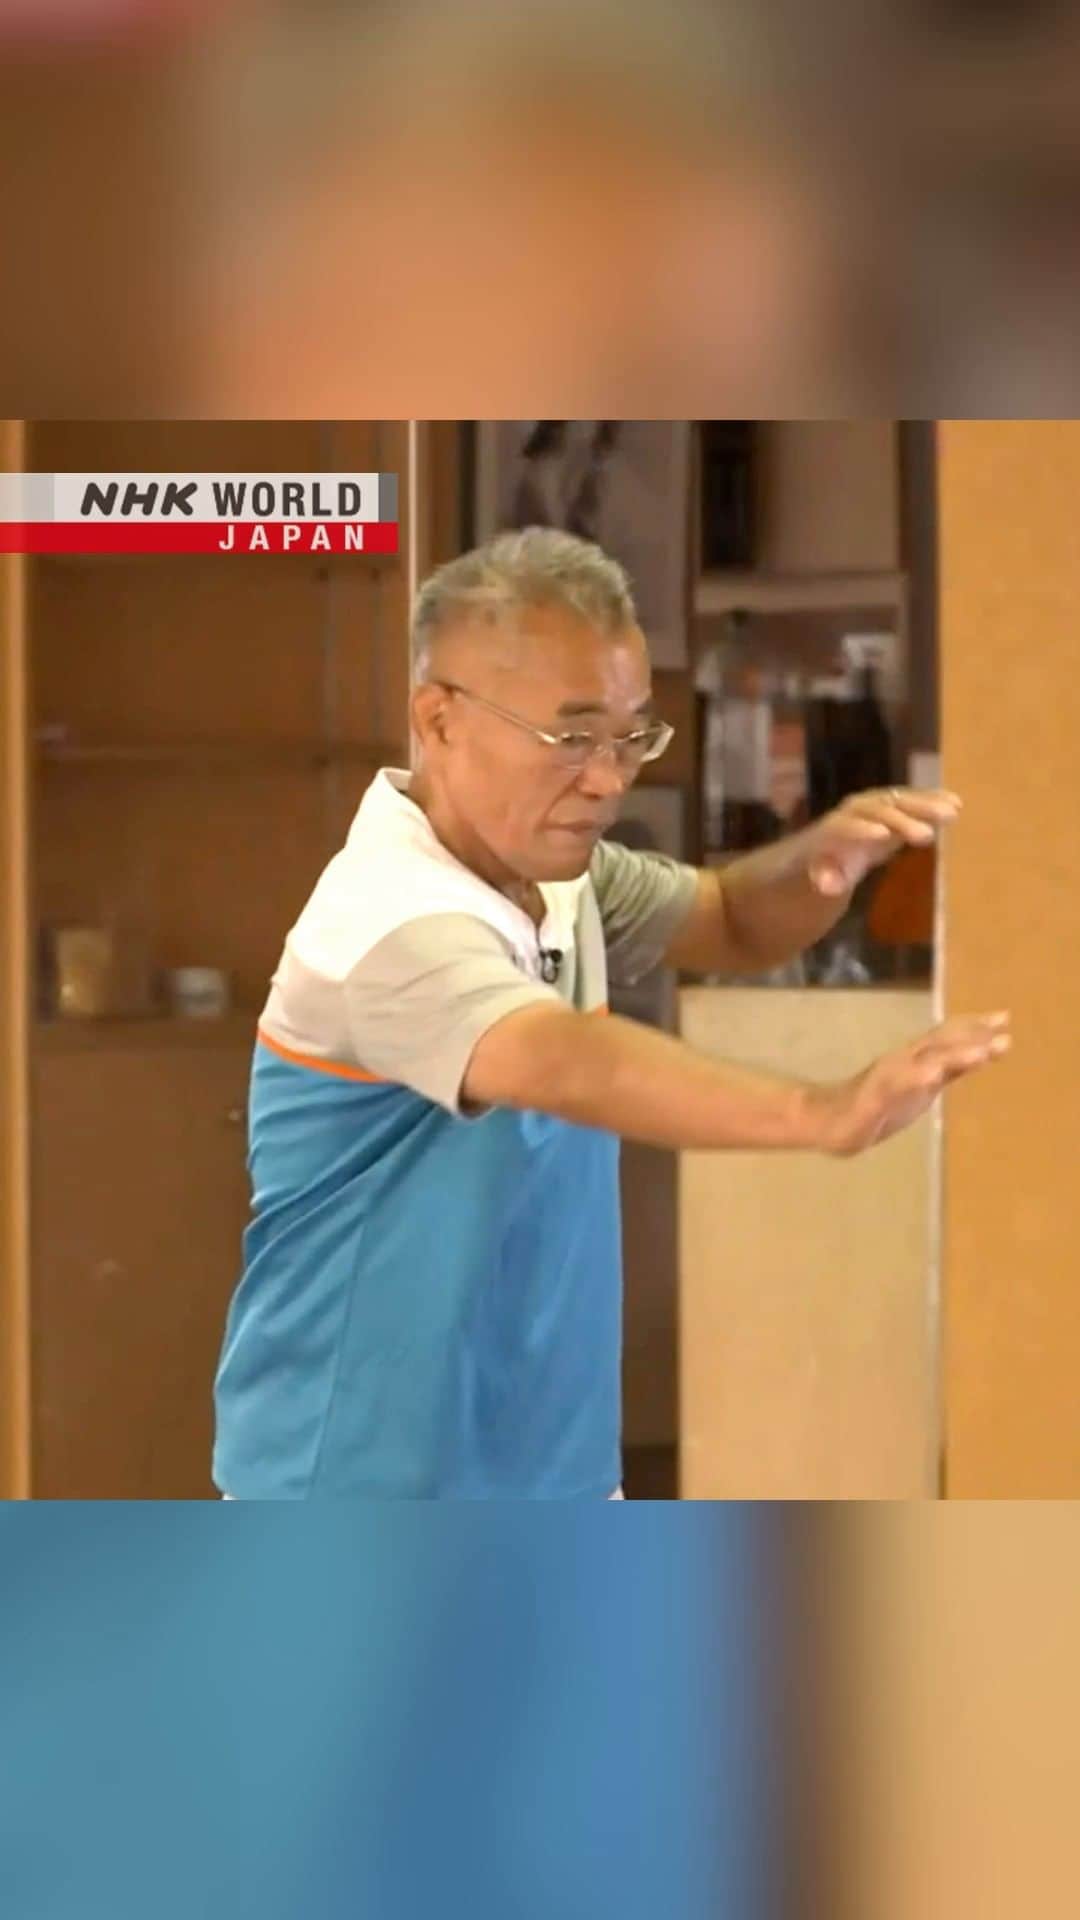 NHK「WORLD-JAPAN」のインスタグラム：「This exercise is inspired by the training routine of sumo wrestlers (rikishi).  It's called ‘teppo’ and teaches rikishi the basics of pushing out their opponent while helping strengthen their shoulder blades. 💪  In sumo training it's usually done against a pillar but former rikishi, Matsuda Tetsuhiro, has modified it so it can be done anywhere.  Matsuda-san says focus only on moving your bones.  It should engage your shoulder blades and coordinate your entire body from the arms to the shoulder blades, hips, knees and feet. 💪🦵😁 . 👉For full instructions｜See｜Medical Frontiers: Tackling Heart Failure Through the Kidneys｜Video available Free On Demand｜NHK WORLD-JAPAN website.👀 . 👉Do not do anything that causes pain. . 👉Tap in Stories/Highlights to get there.👆 . 👉Follow the link in our bio for more on the latest from Japan. . 👉If we’re on your Favorites list you won’t miss a post. . . #sumoexercise #exercise #exerciseanywhere #strengthenyourbody #松田哲博 #teppo #armexercise #sumostable #sumotraining #sumo #相撲 #sumojapan #sumowrestler #rikishi #japanesesumo #sumowrestling #discoverjapan #hiddenjapan #healthandfitness #japaneseculture #japanesetradition #medicalfrontiers #japan #nhkworldjapan」